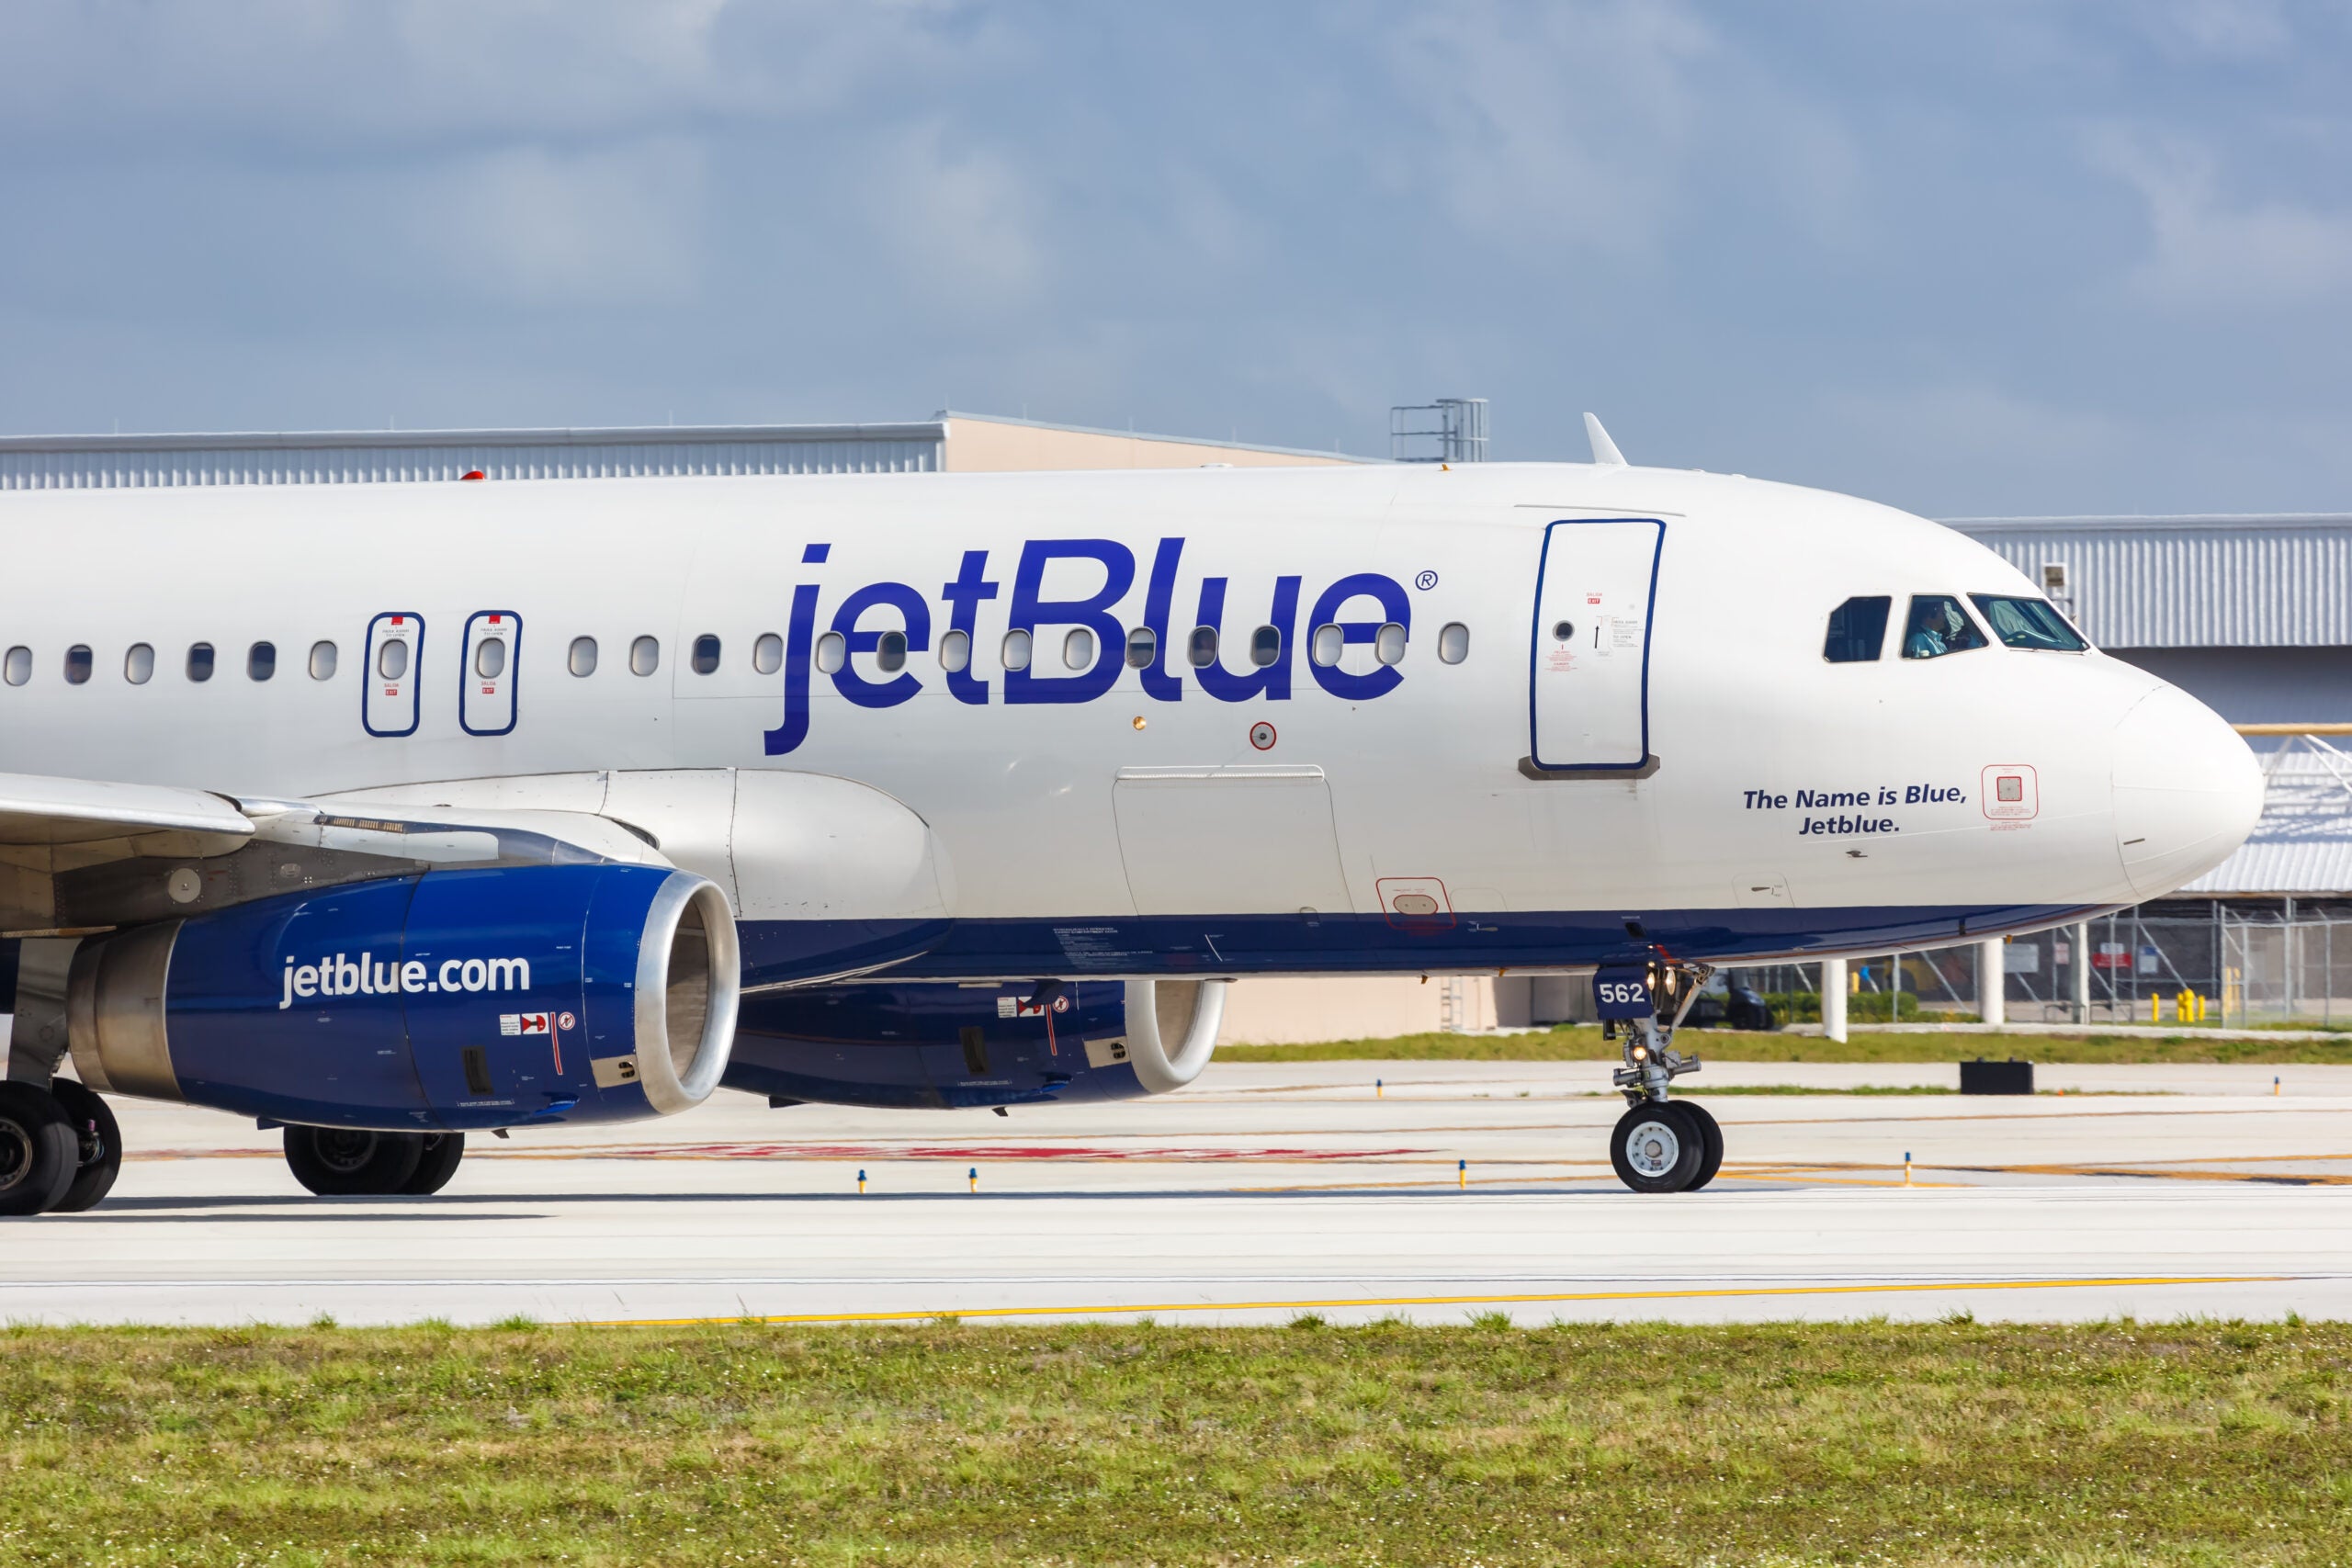 JetBlue Makes an All-Cash Bid for Spirit, Could Disrupt Frontier Merger